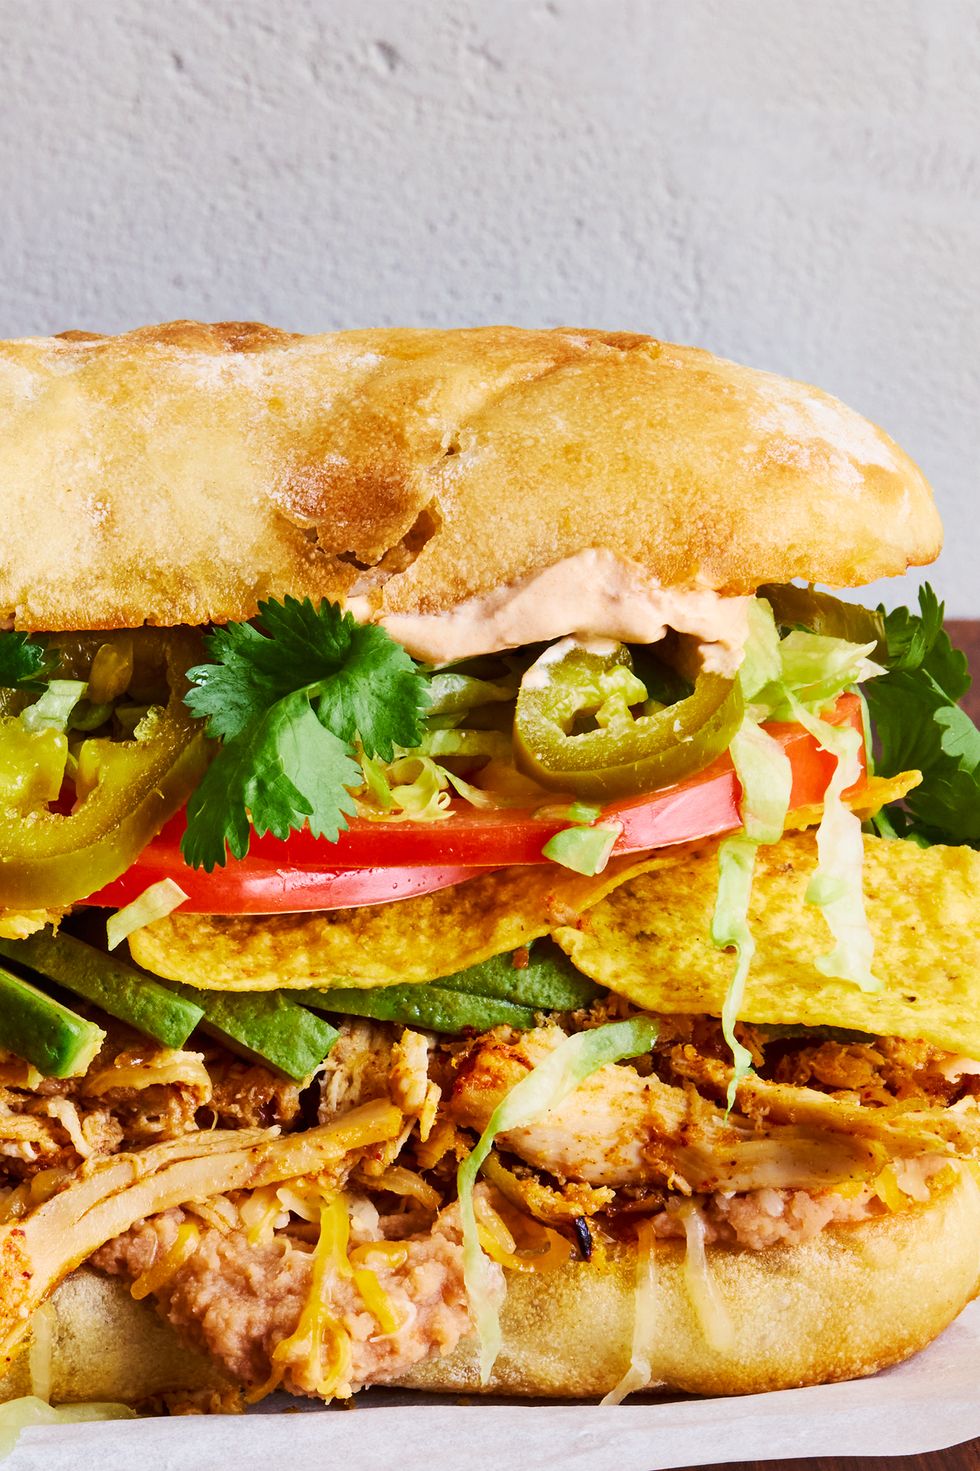 shredded chicken, veggies, and tortilla chips between two slices of bread